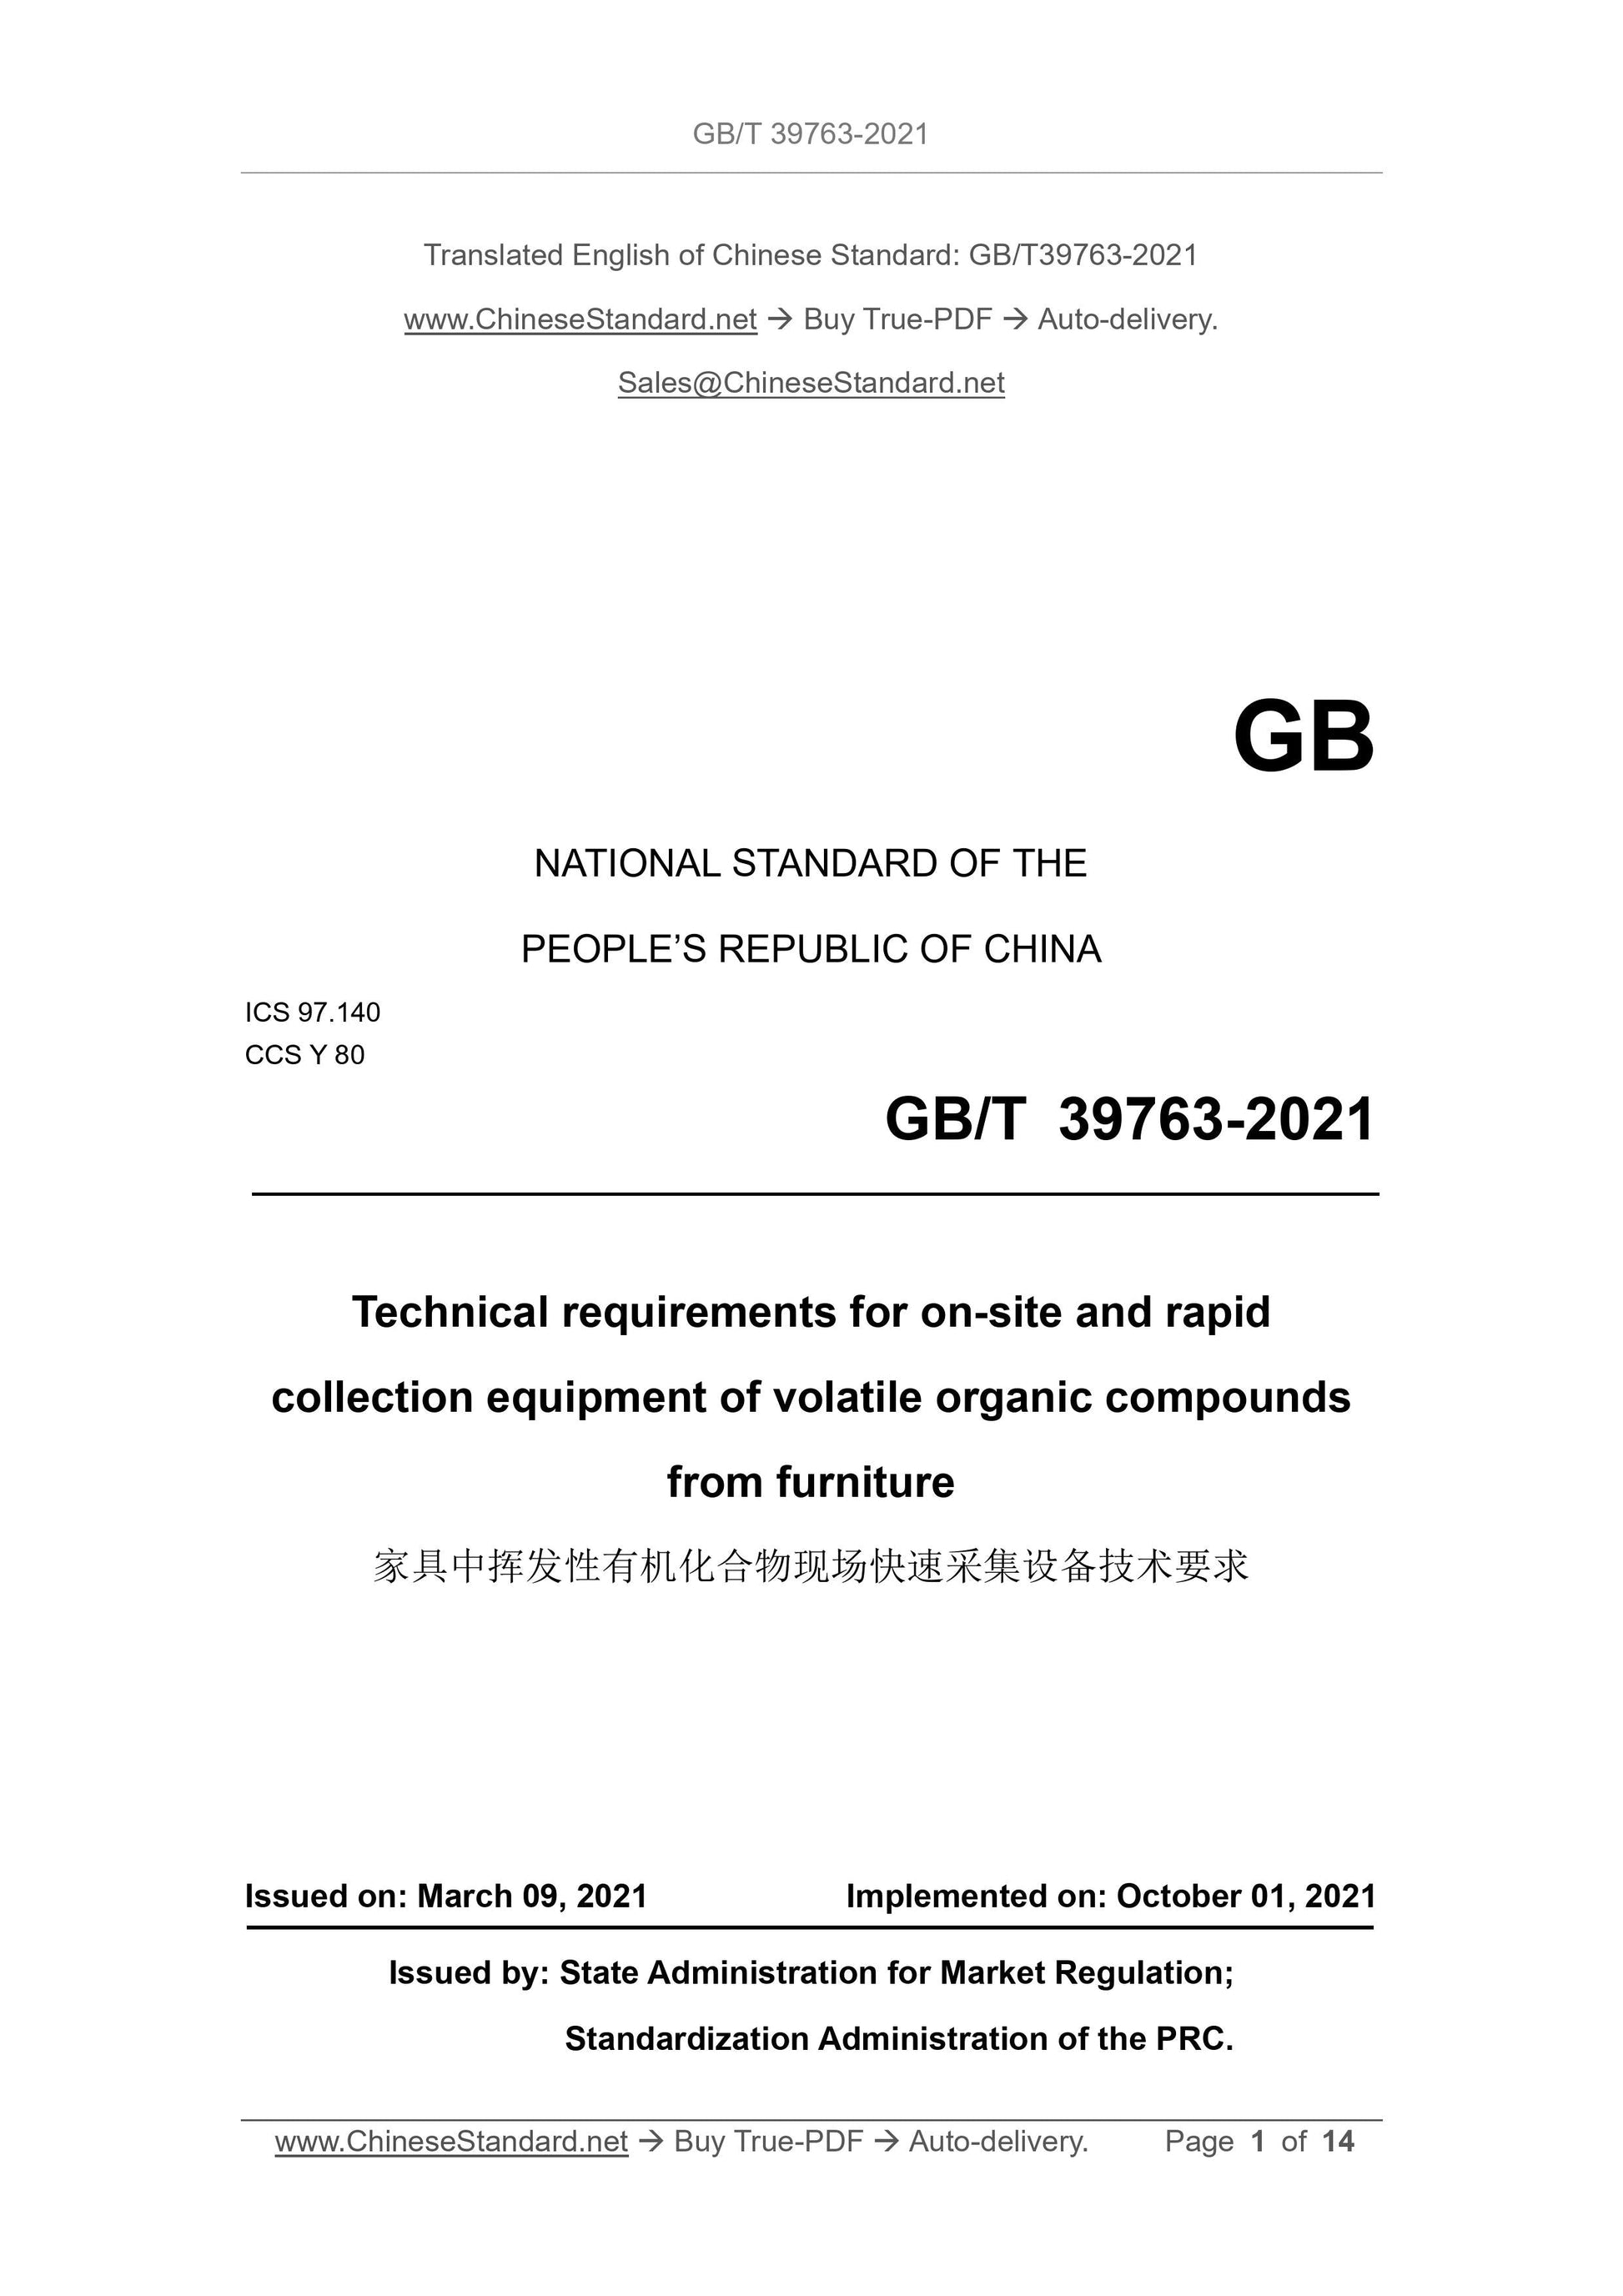 GB/T 39763-2021 Page 1